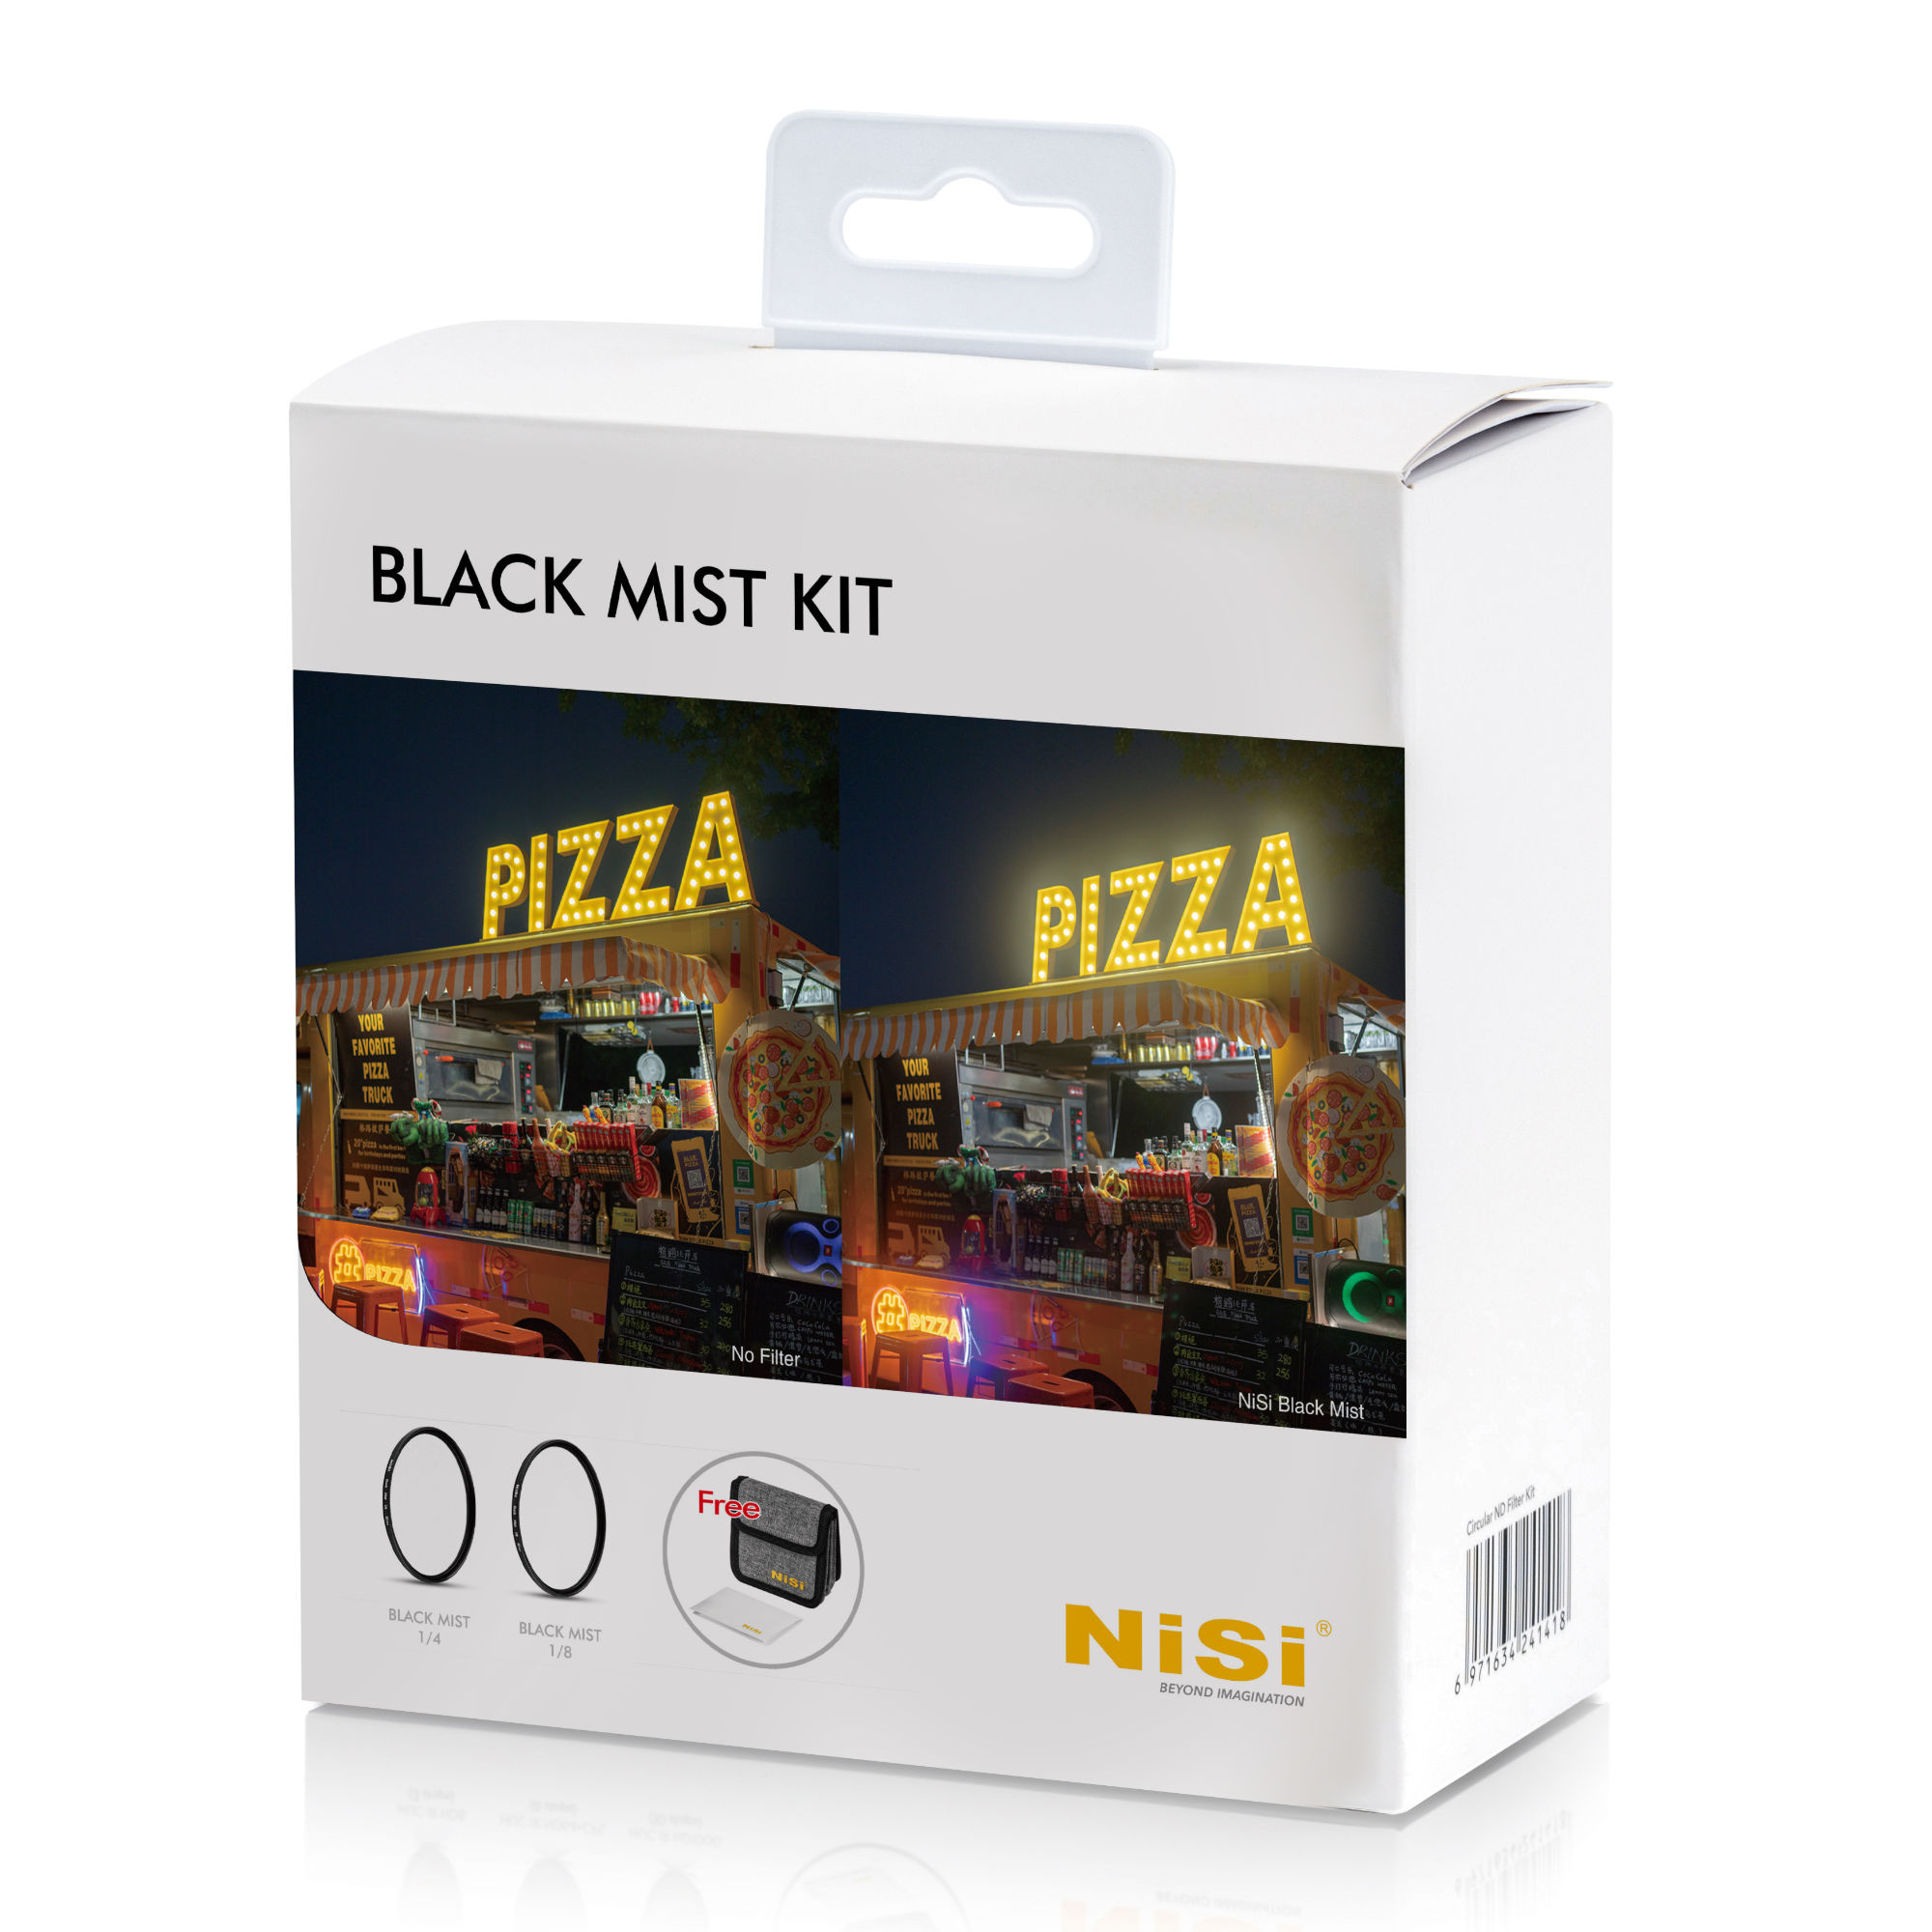 NiSi Black Mist Kit with 1/4, 1/8 and Case (62mm)